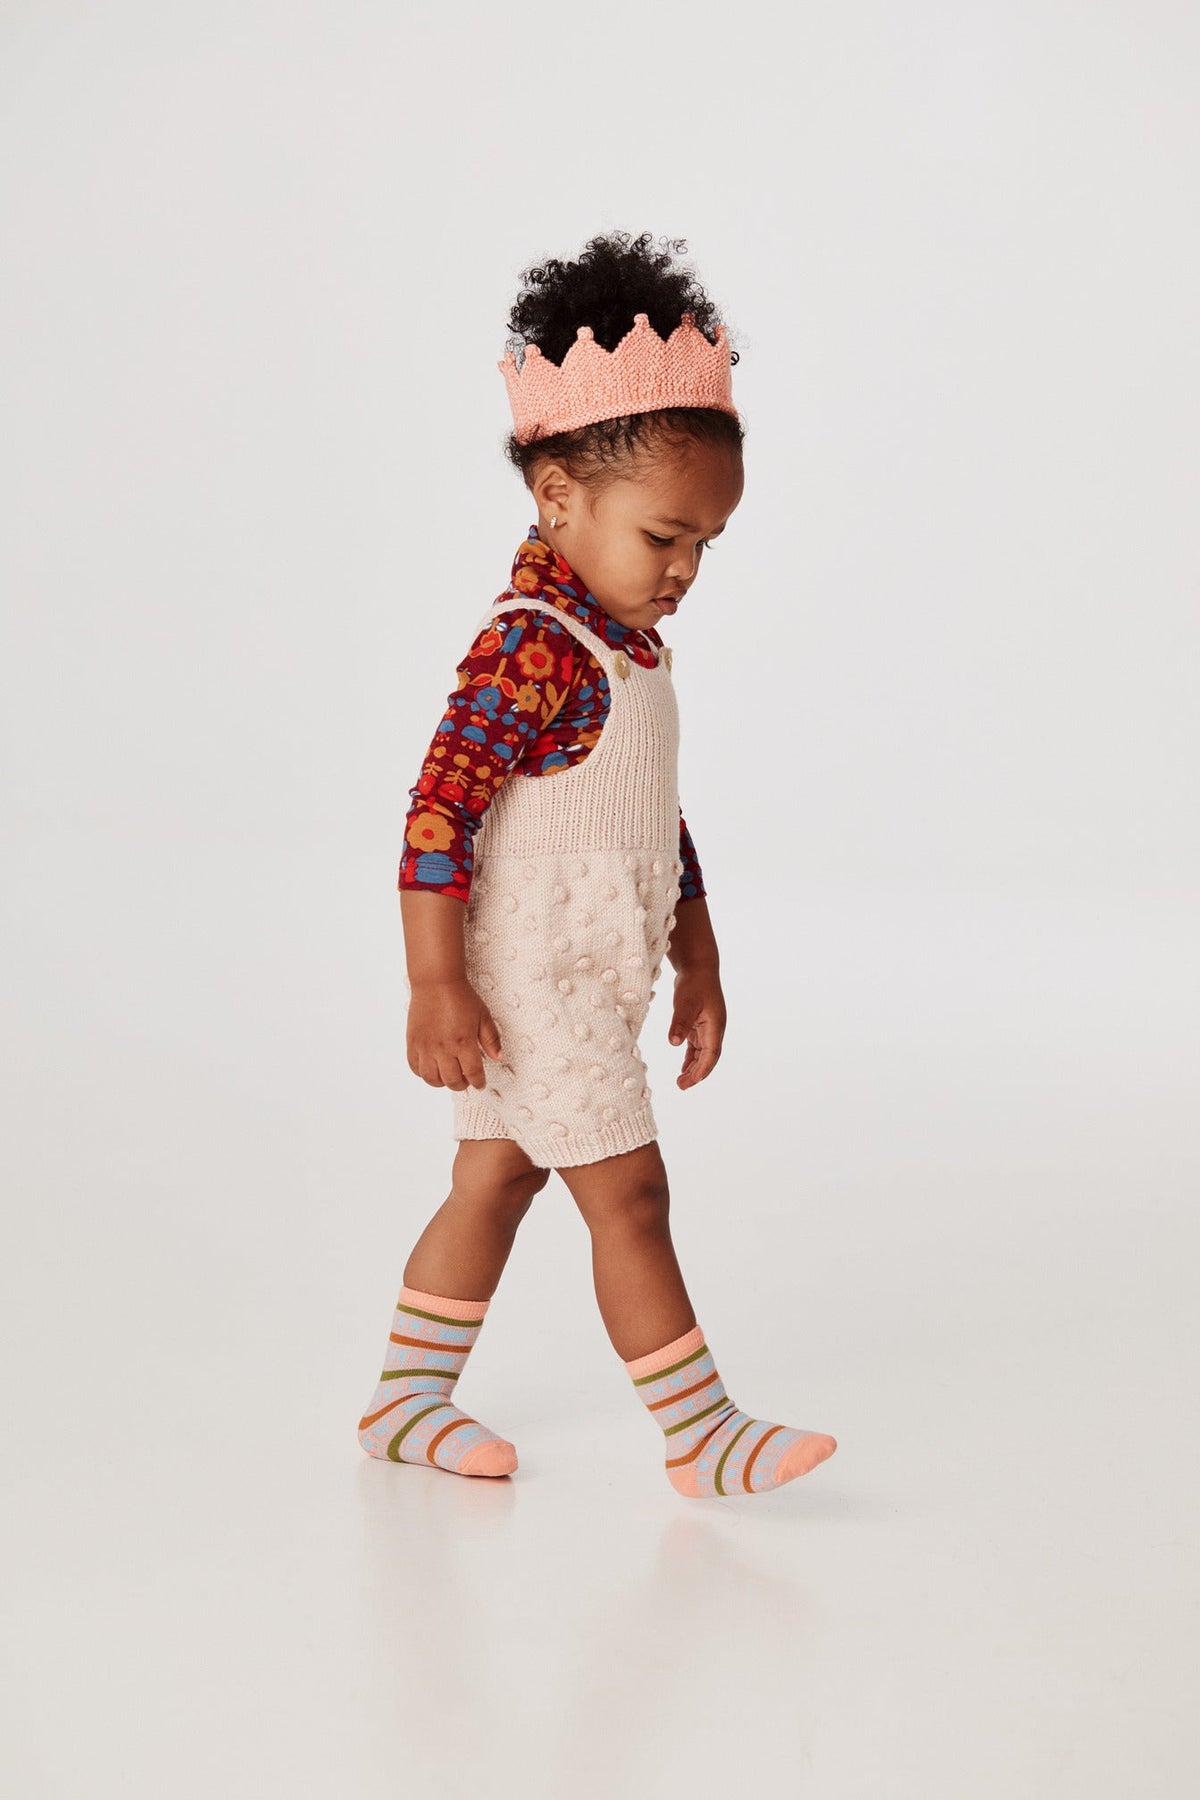 Popcorn Romper - Dune+Model is 32 inches tall, 25lbs, wearing a size 12-18m